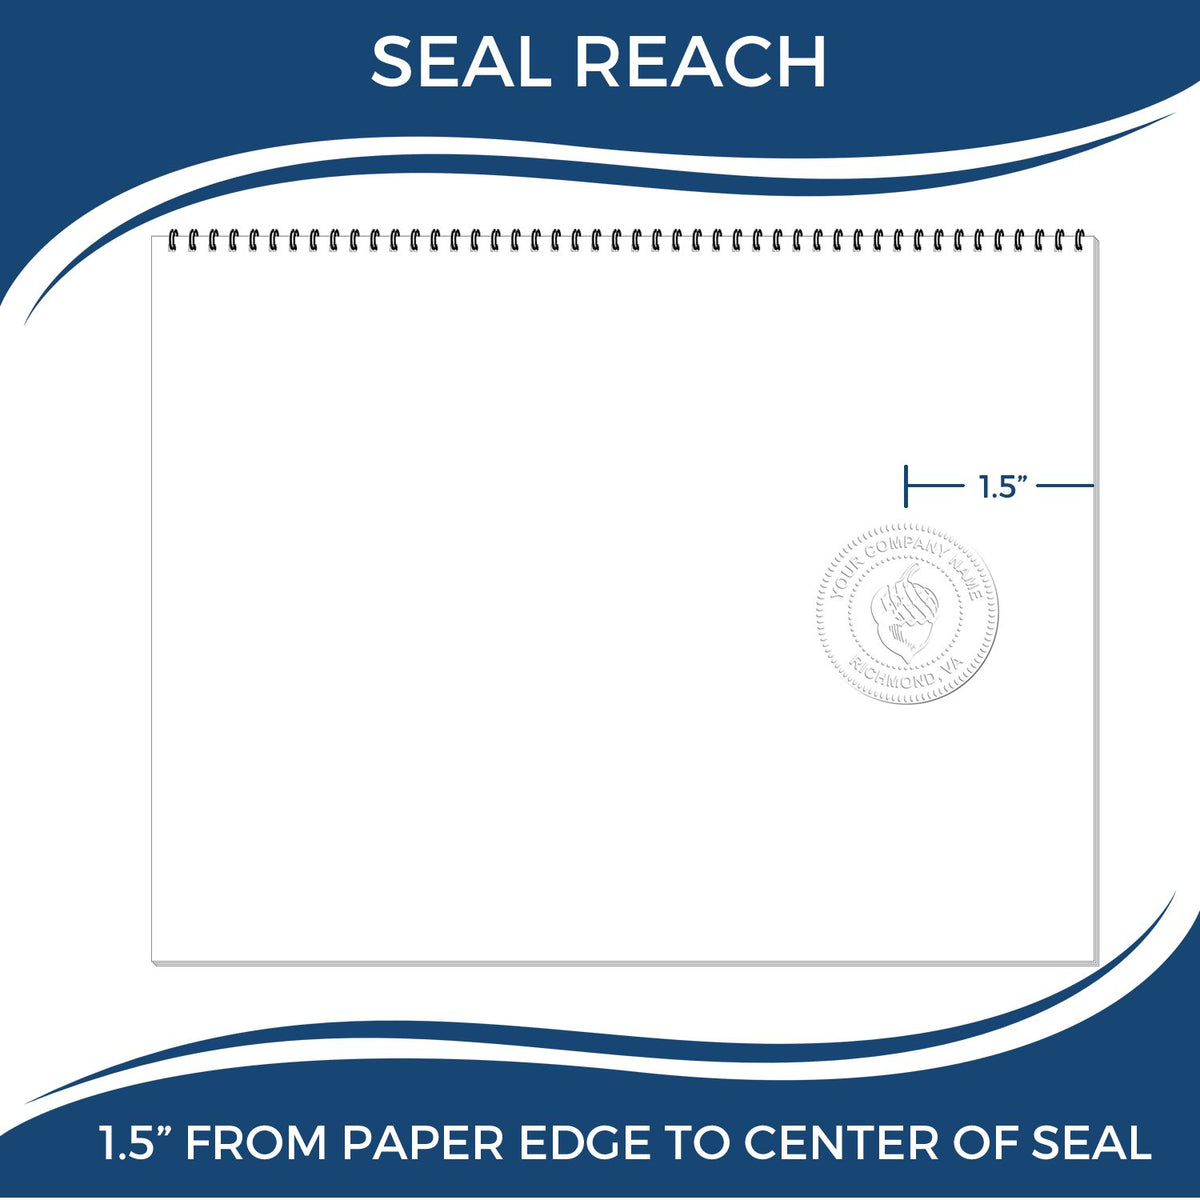 An infographic showing the seal reach which is represented by a ruler and a miniature seal image of the Hybrid Missouri Land Surveyor Seal